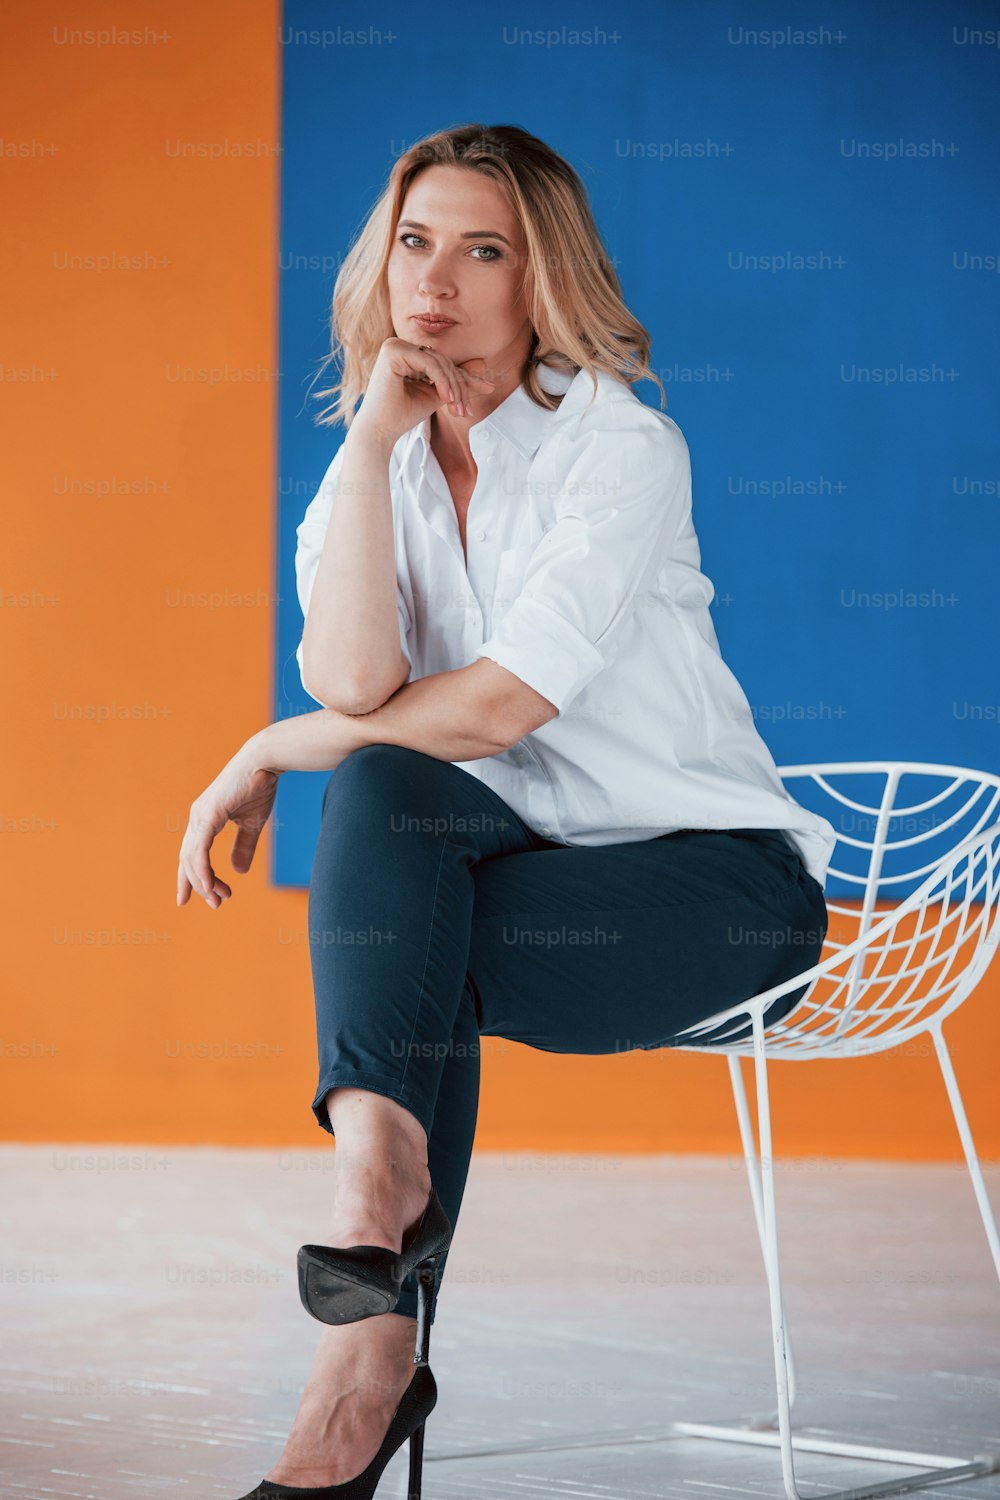 Sitting on white chair. Businesswoman with curly blonde hair indoors in room with orange and blue colored wall.